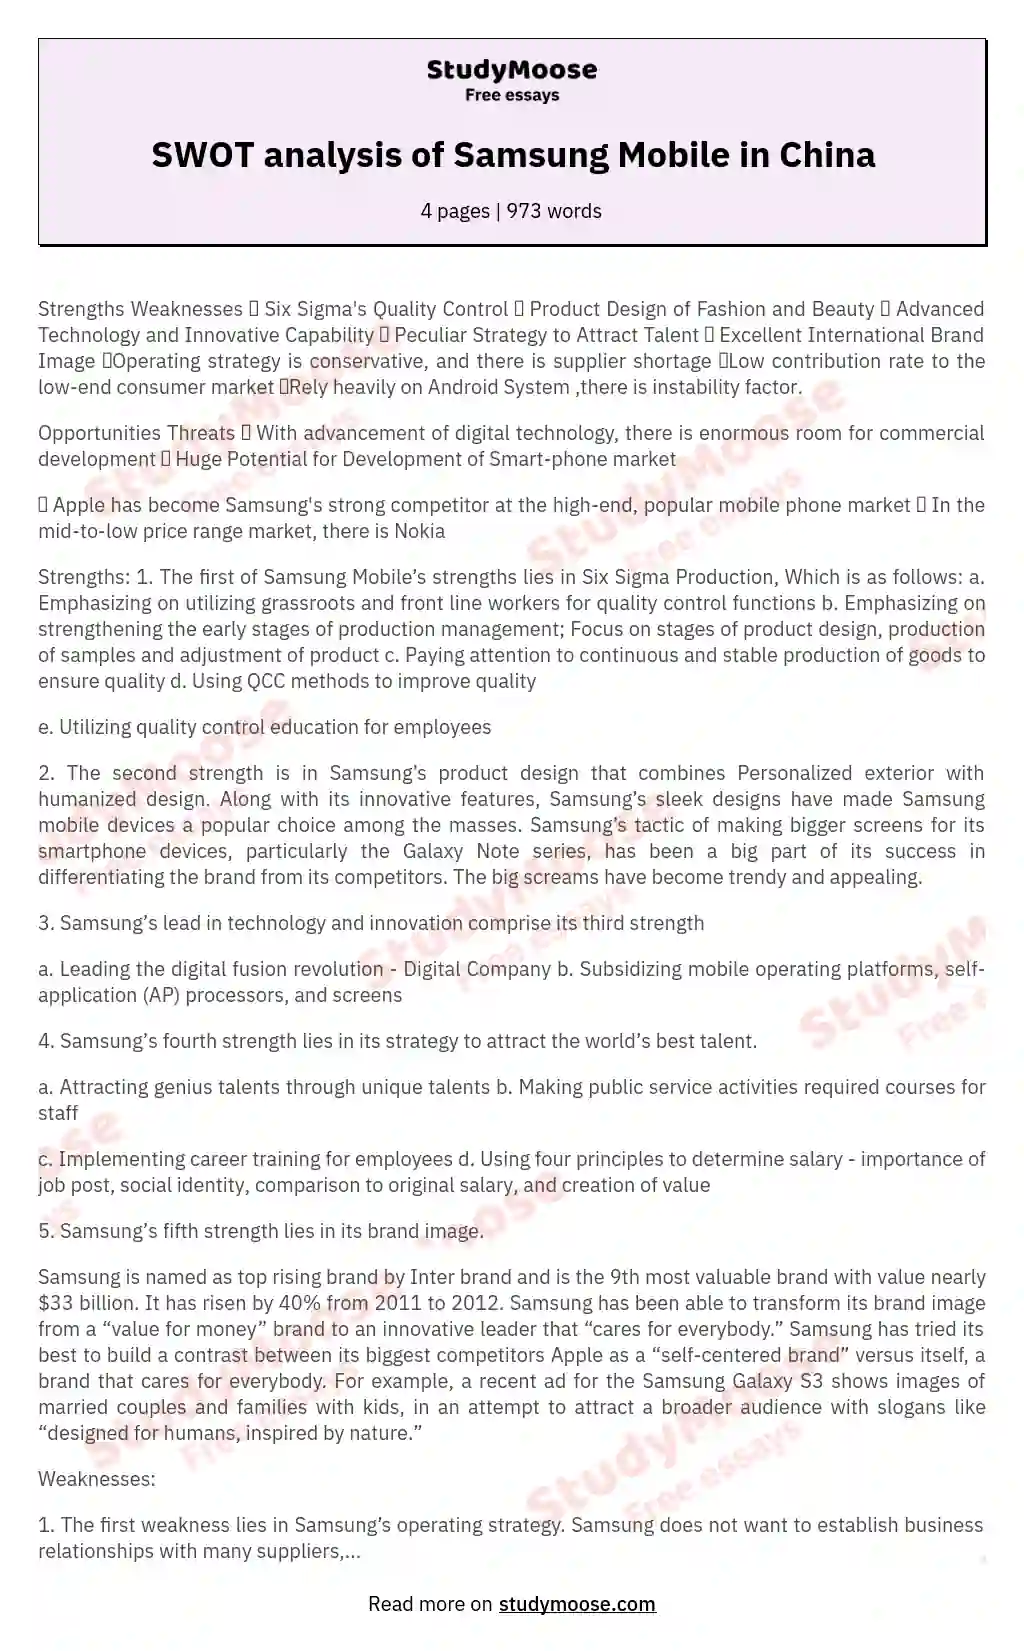 SWOT analysis of Samsung Mobile in China essay